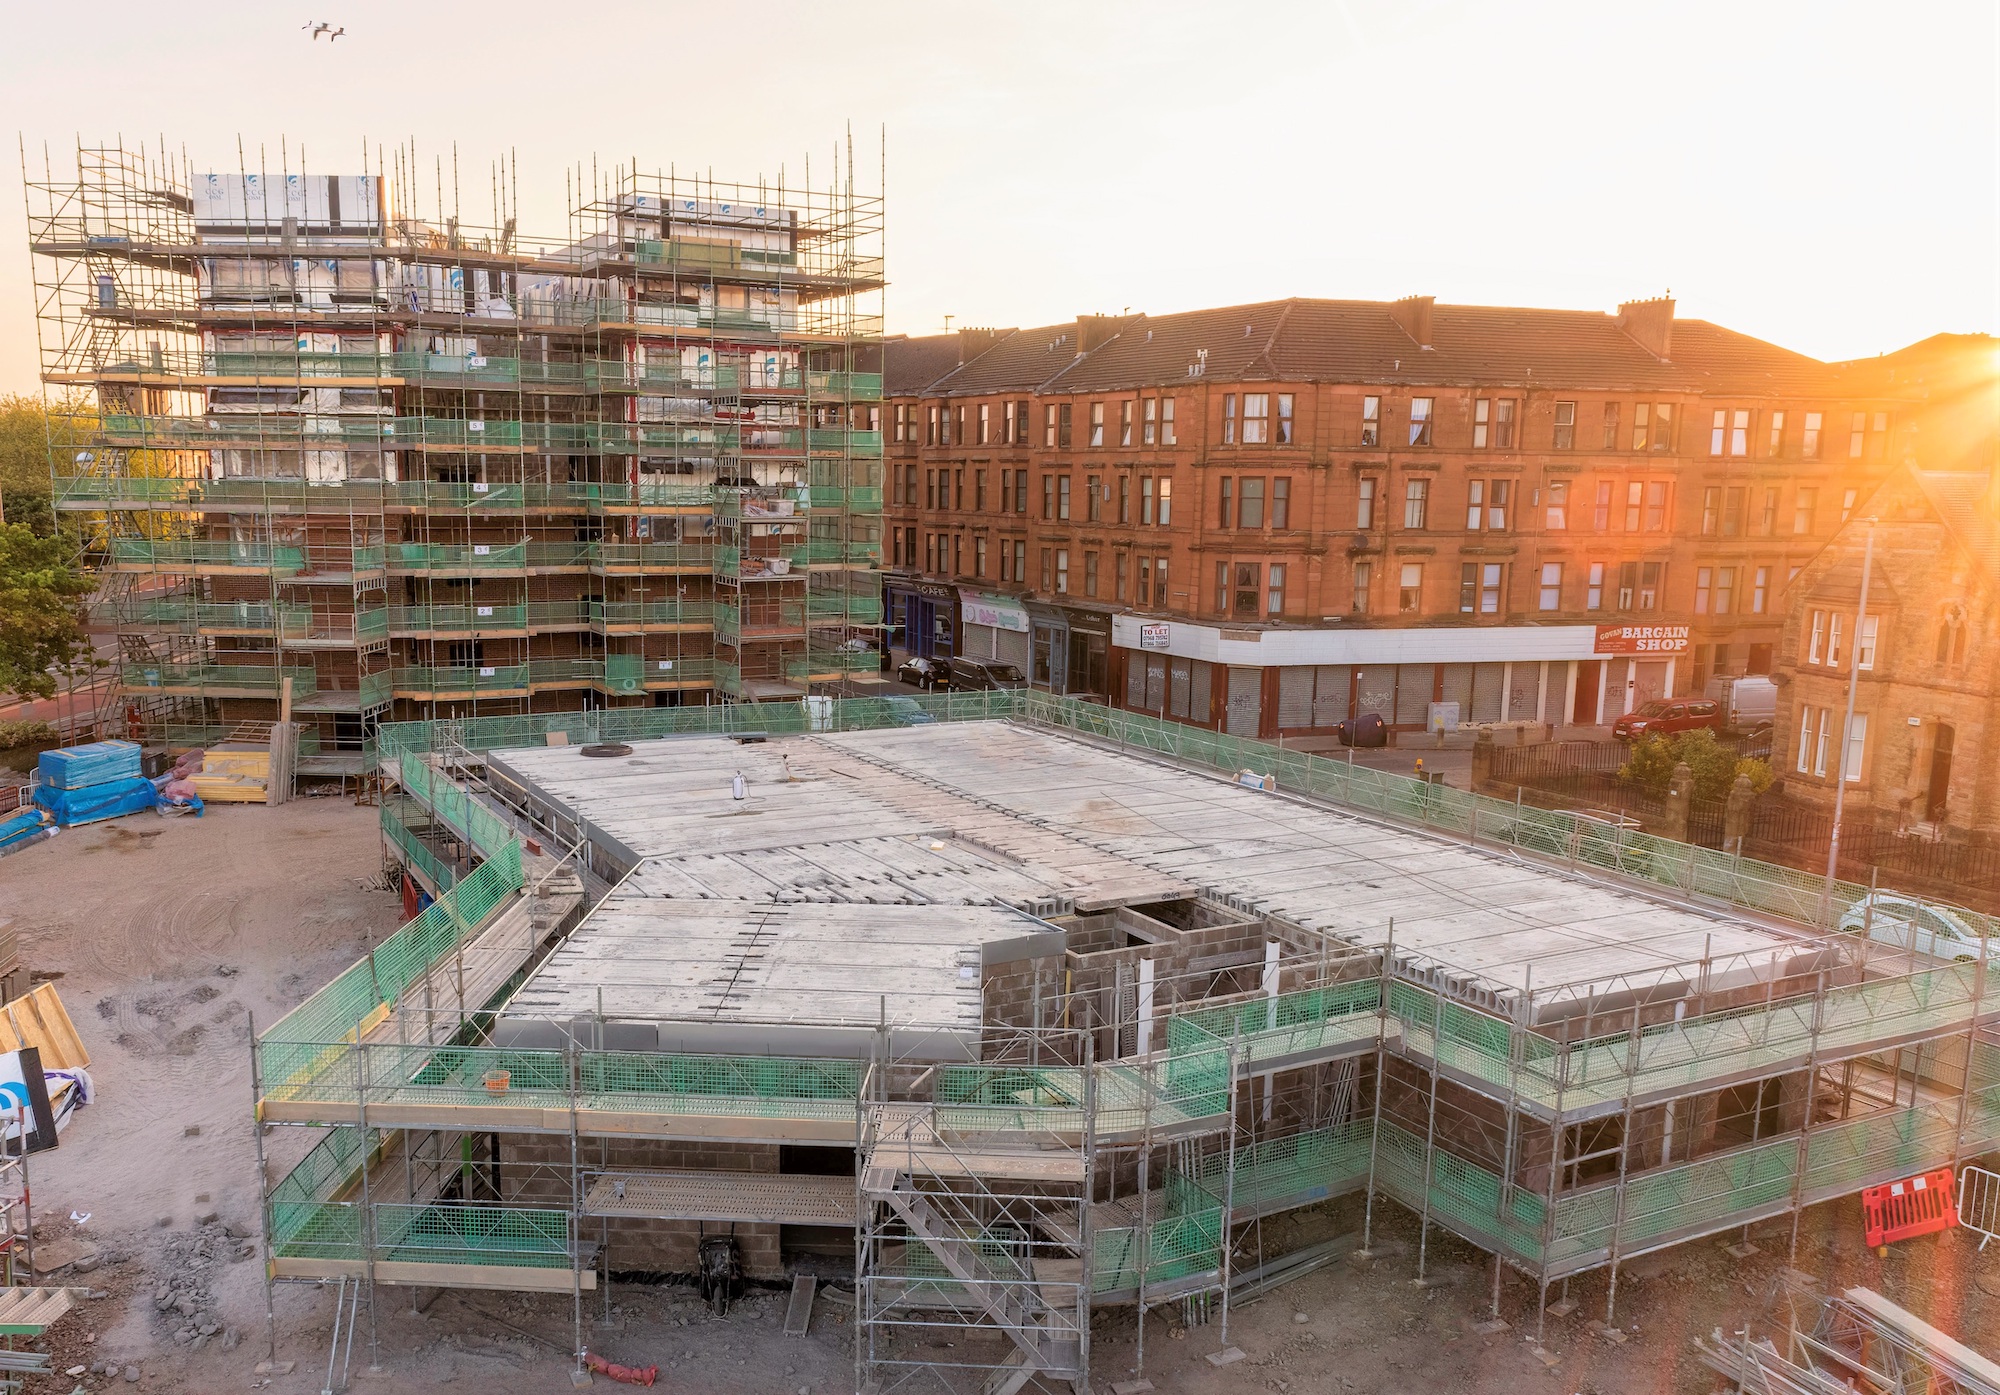 CCG makes strong progress on £9m Govan affordable housing project